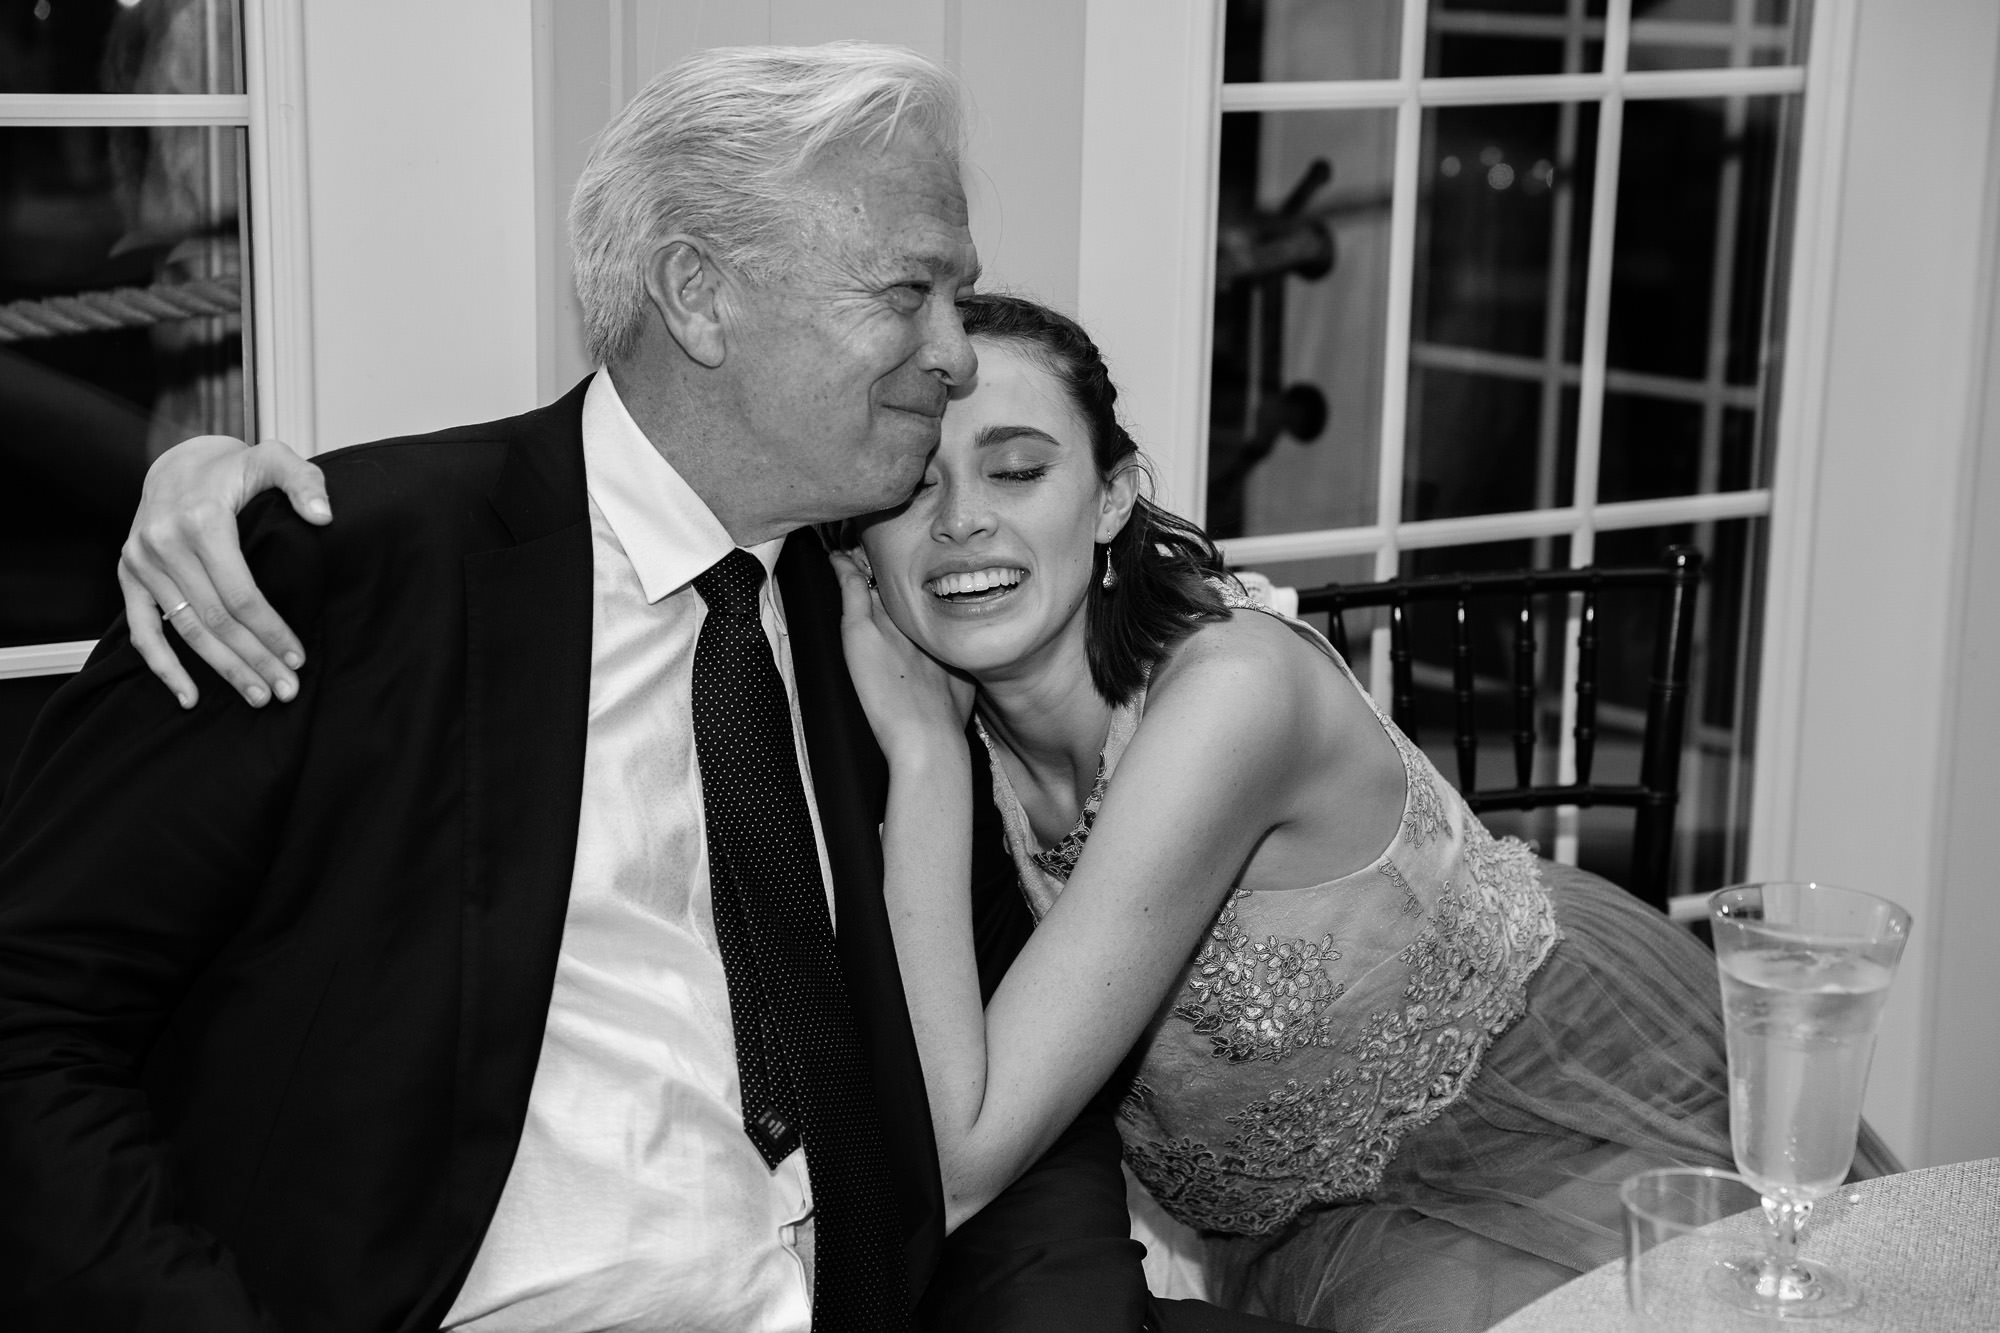 A father and his daughter enjoy a happy moment at a wedding reception.